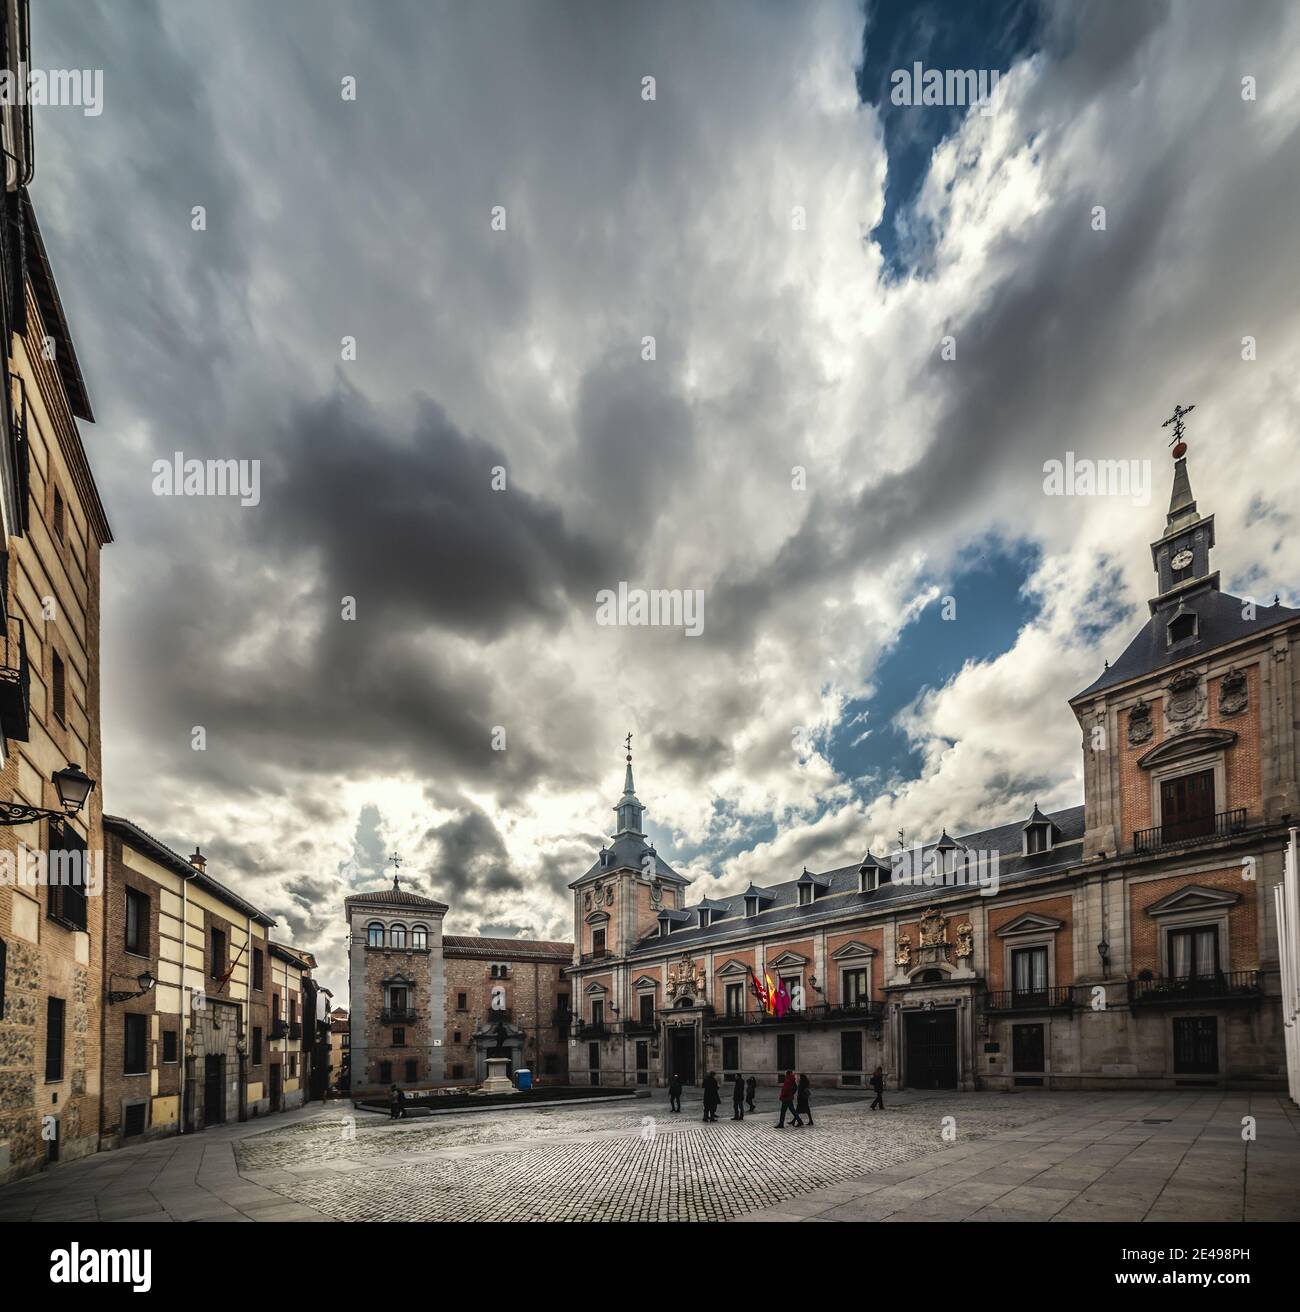 Dramatic sky over Fuerzas Armadas cathedral in Madrid, Spain Stock Photo